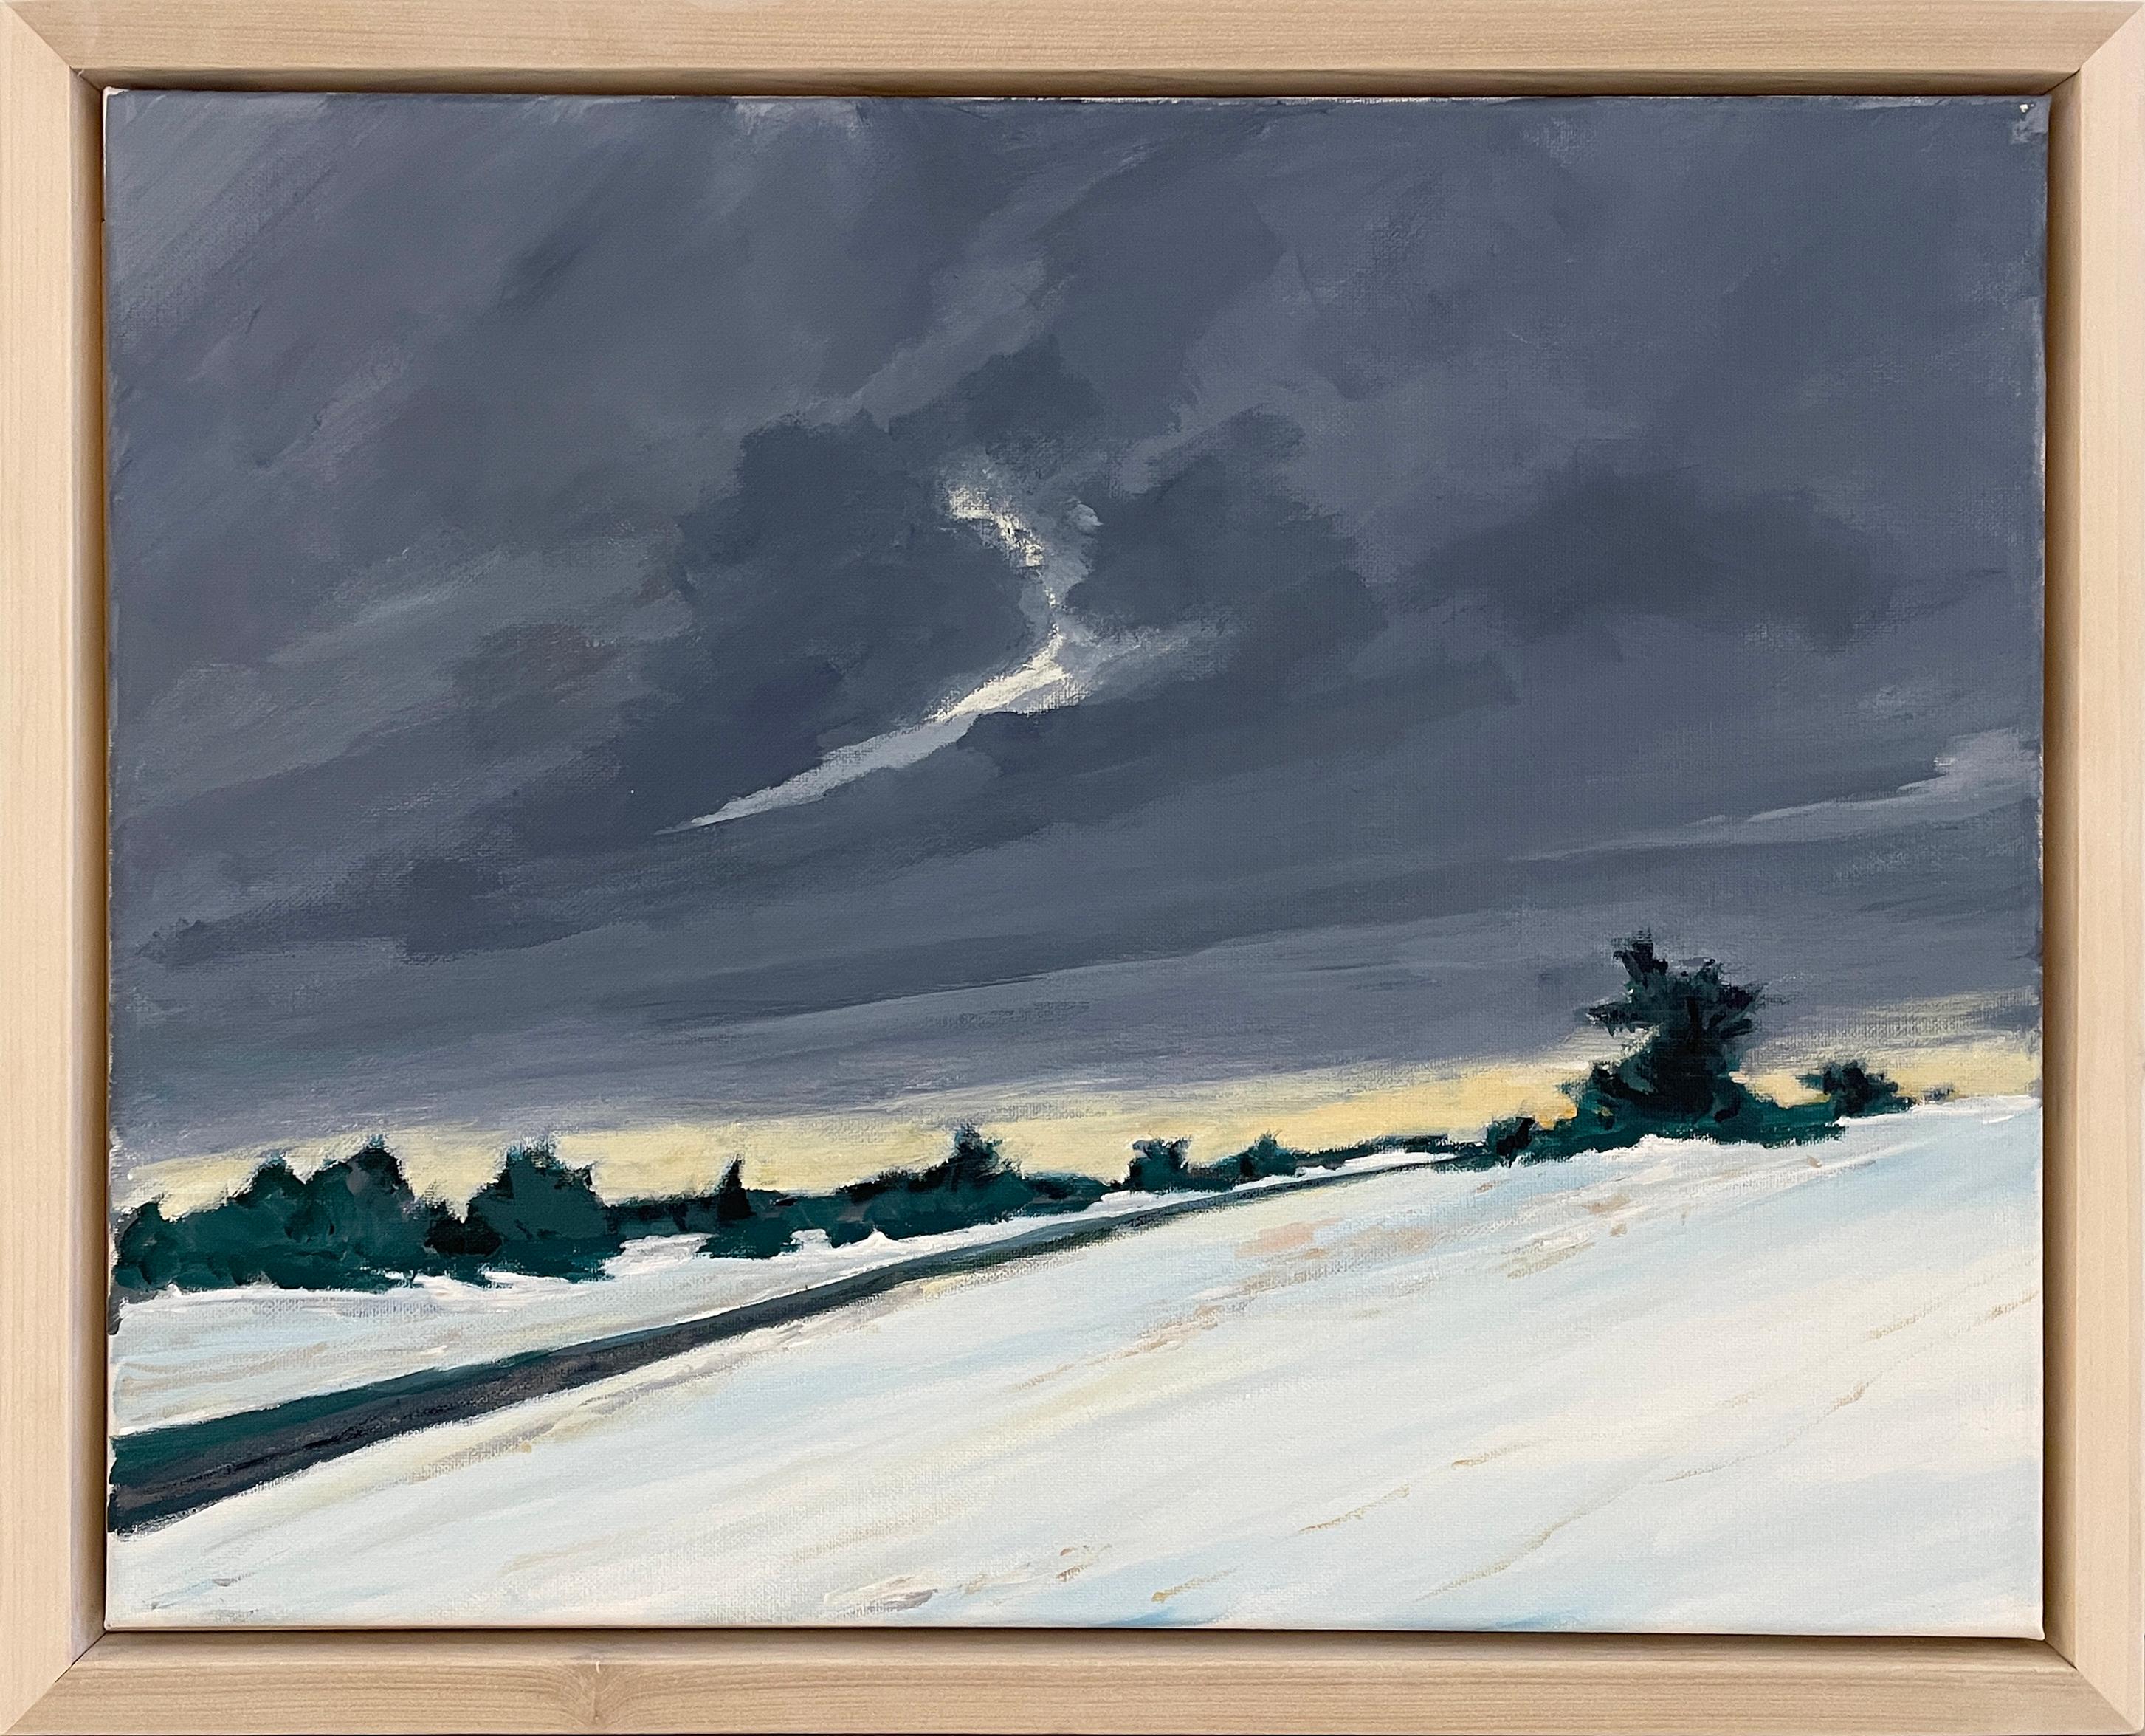 Modern en plein air landscape oil painting on canvas of a snowy winter countryside 
'Solstice' by Joseph Rapp
16 x 20 inches, acrylic on canvas
17.75 x 21.75 x 2 inches framed in white stained wood floater frame

Joseph Rapp’s craftsmanship is